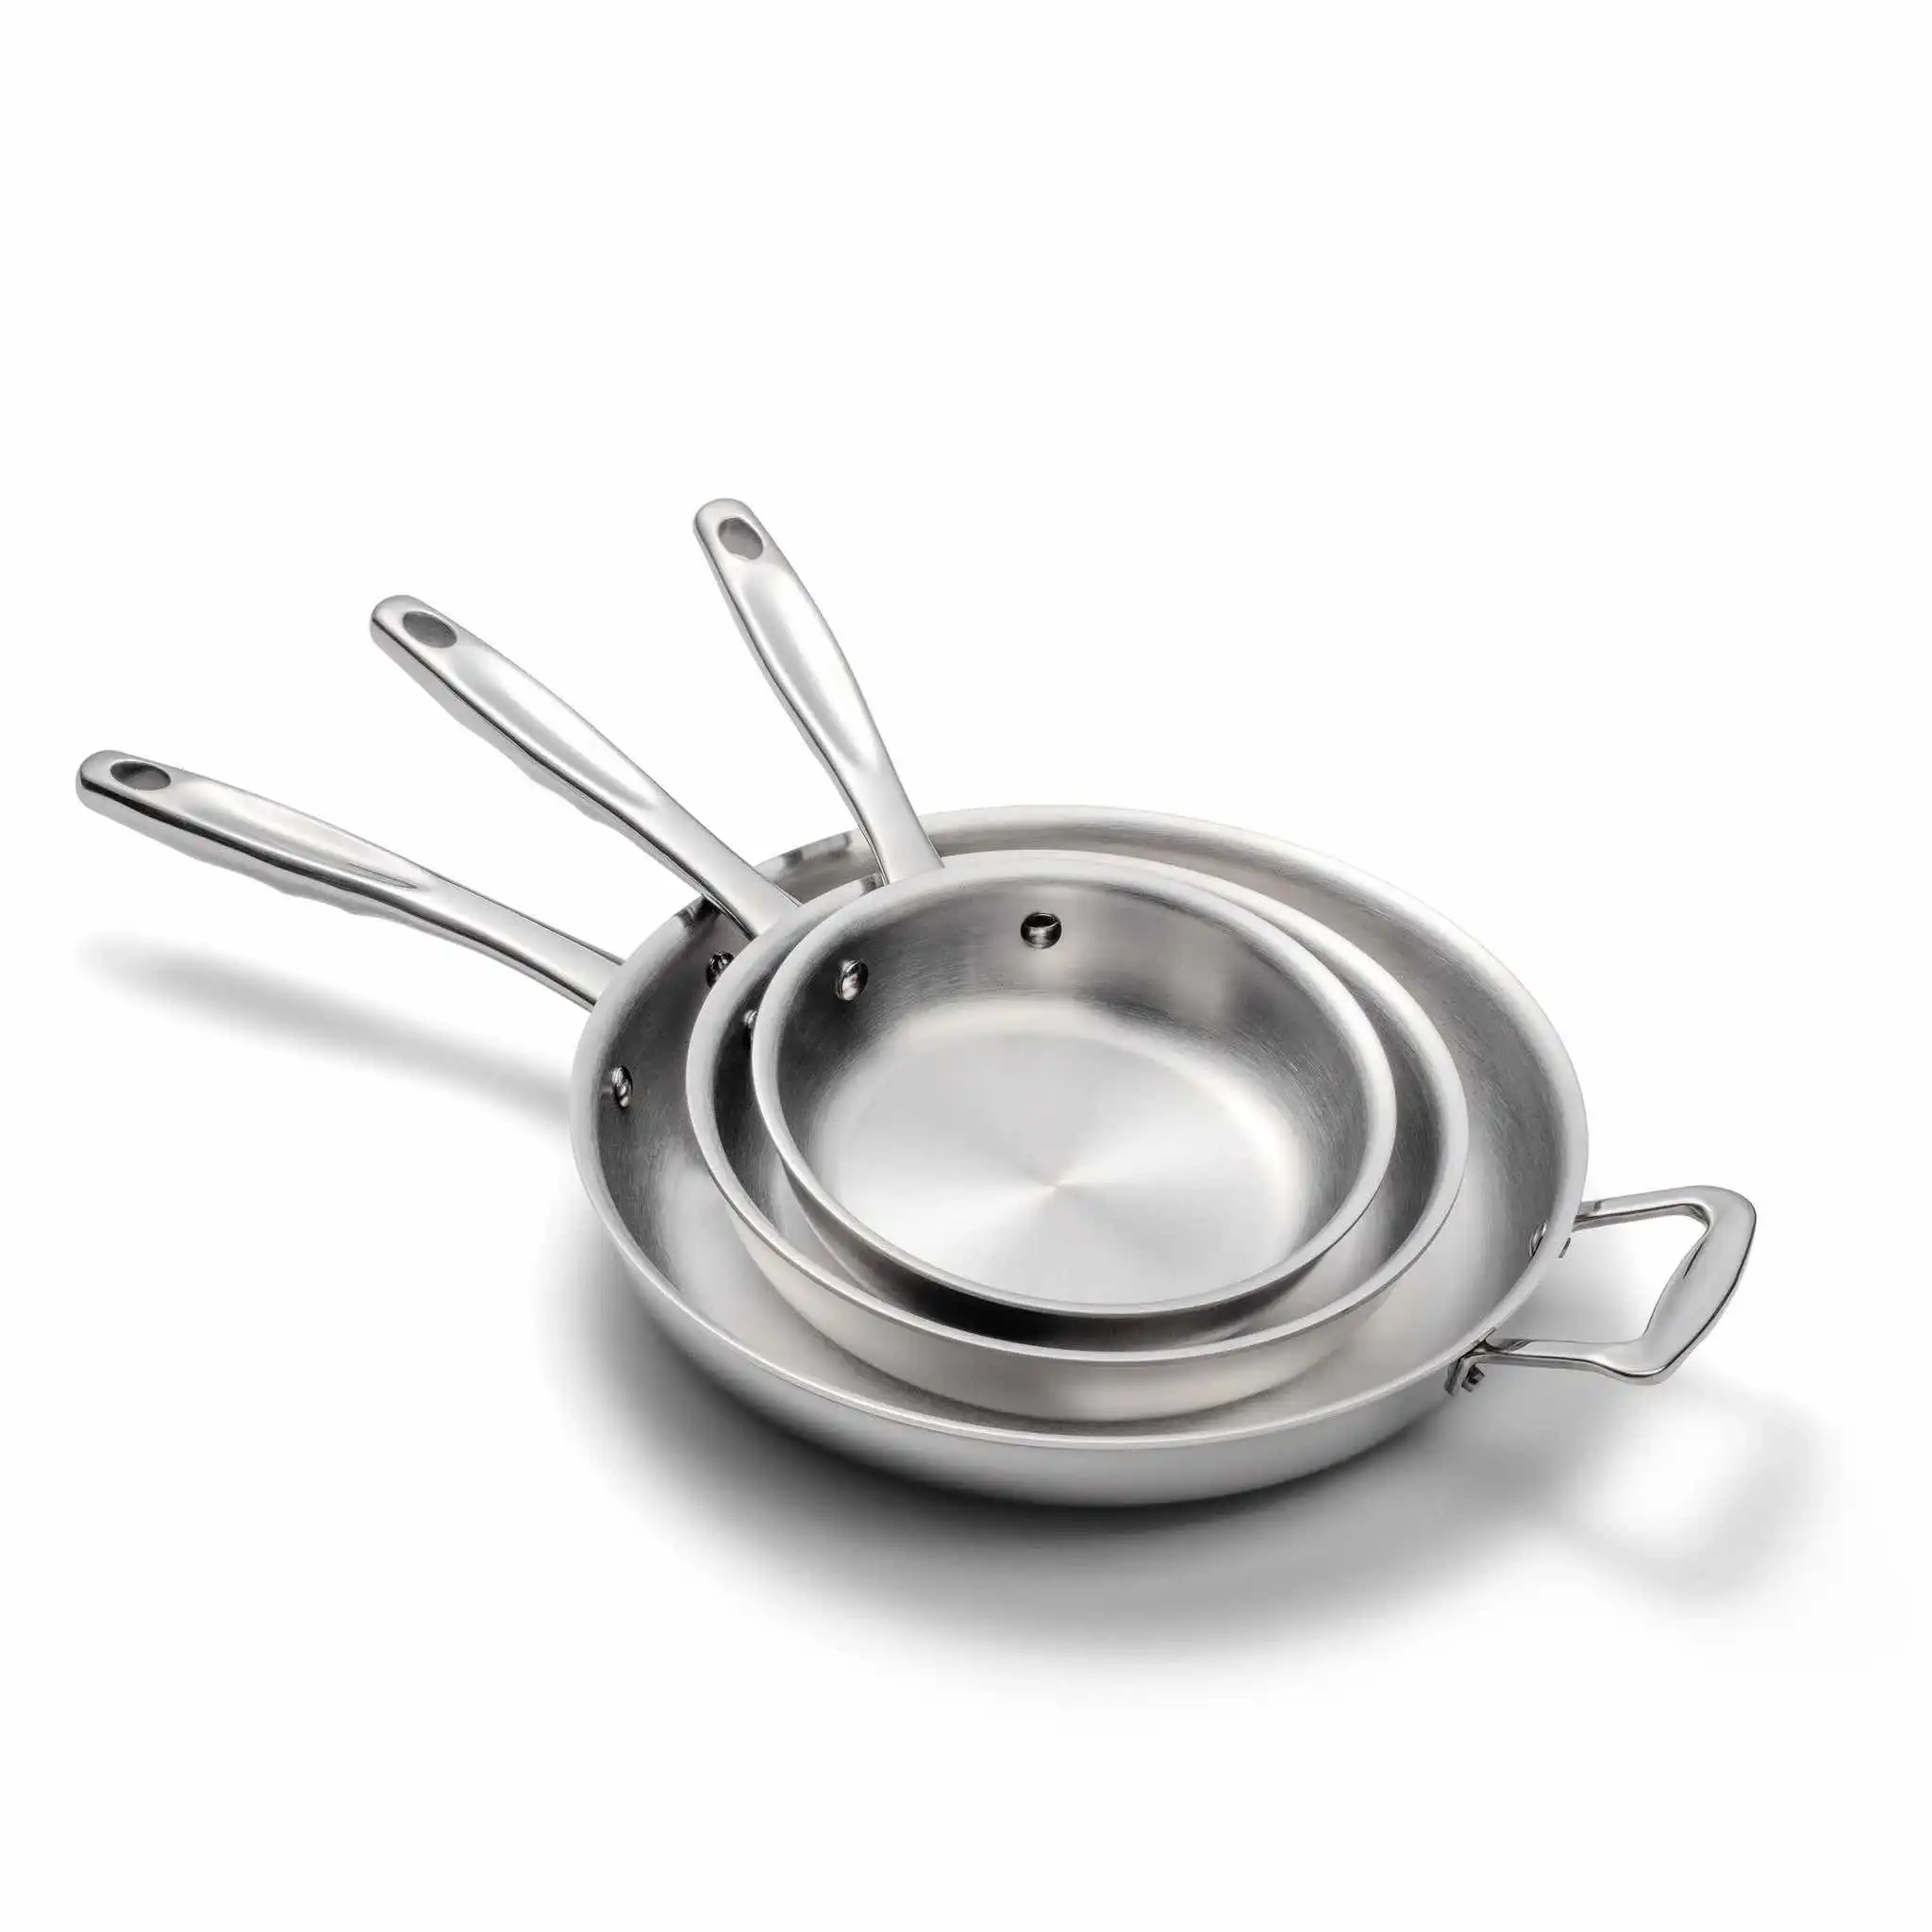 360 Cookware's American Made Stainless Steel 3- Piece Fry Pan Set